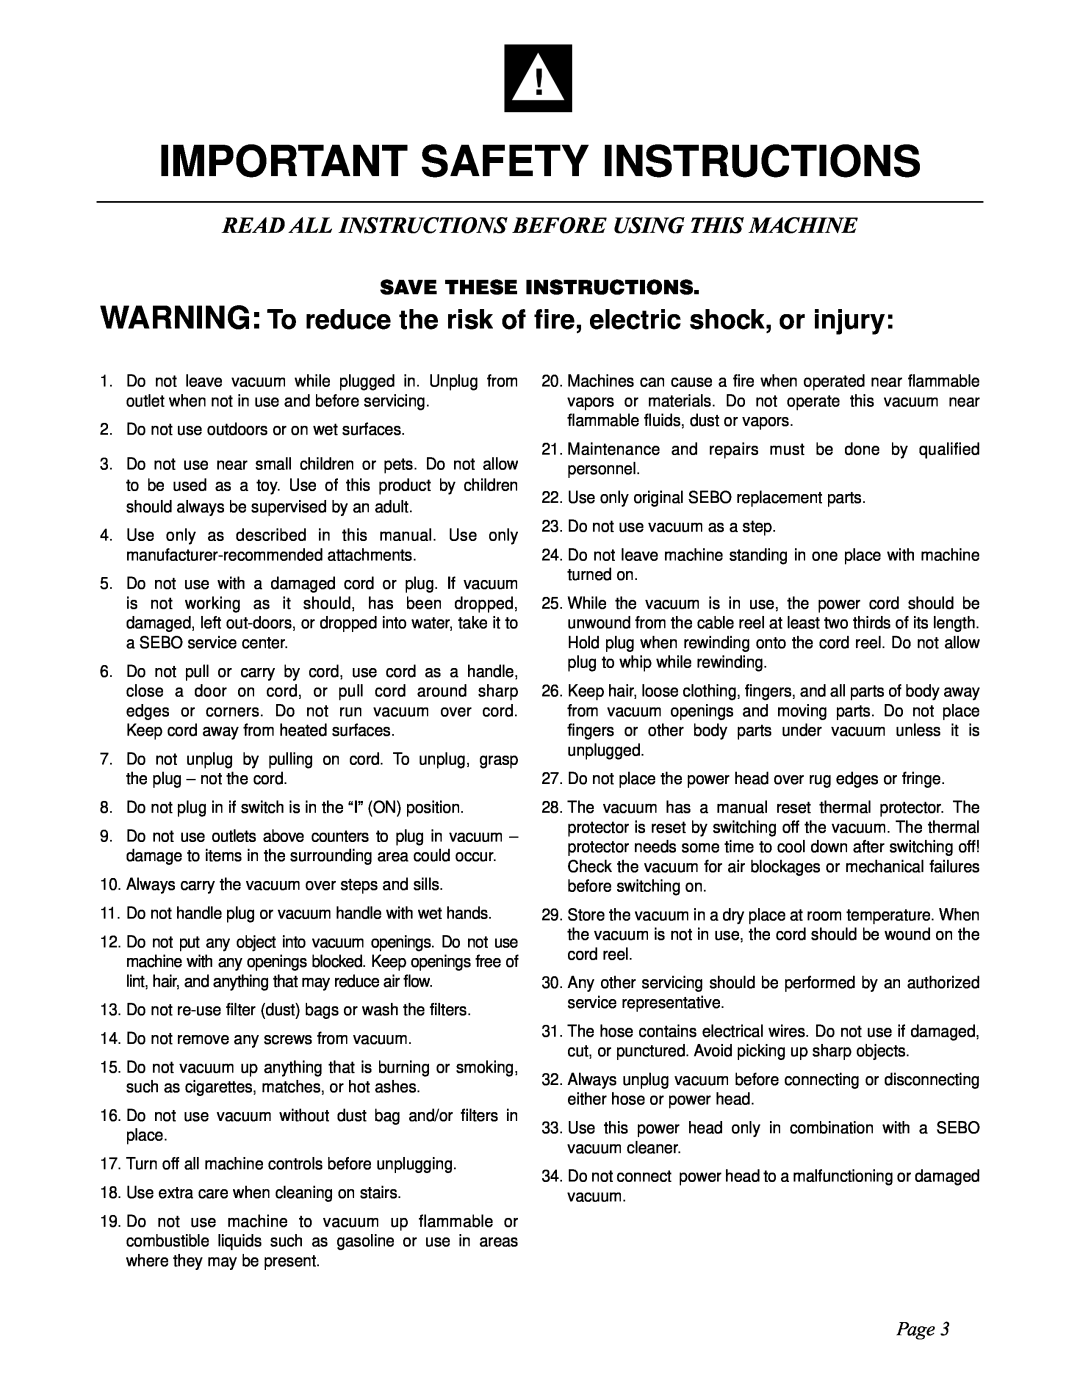 Sebo ET-H manual Important Safety Instructions, WARNING To reduce the risk of fire, electric shock, or injury, Page 